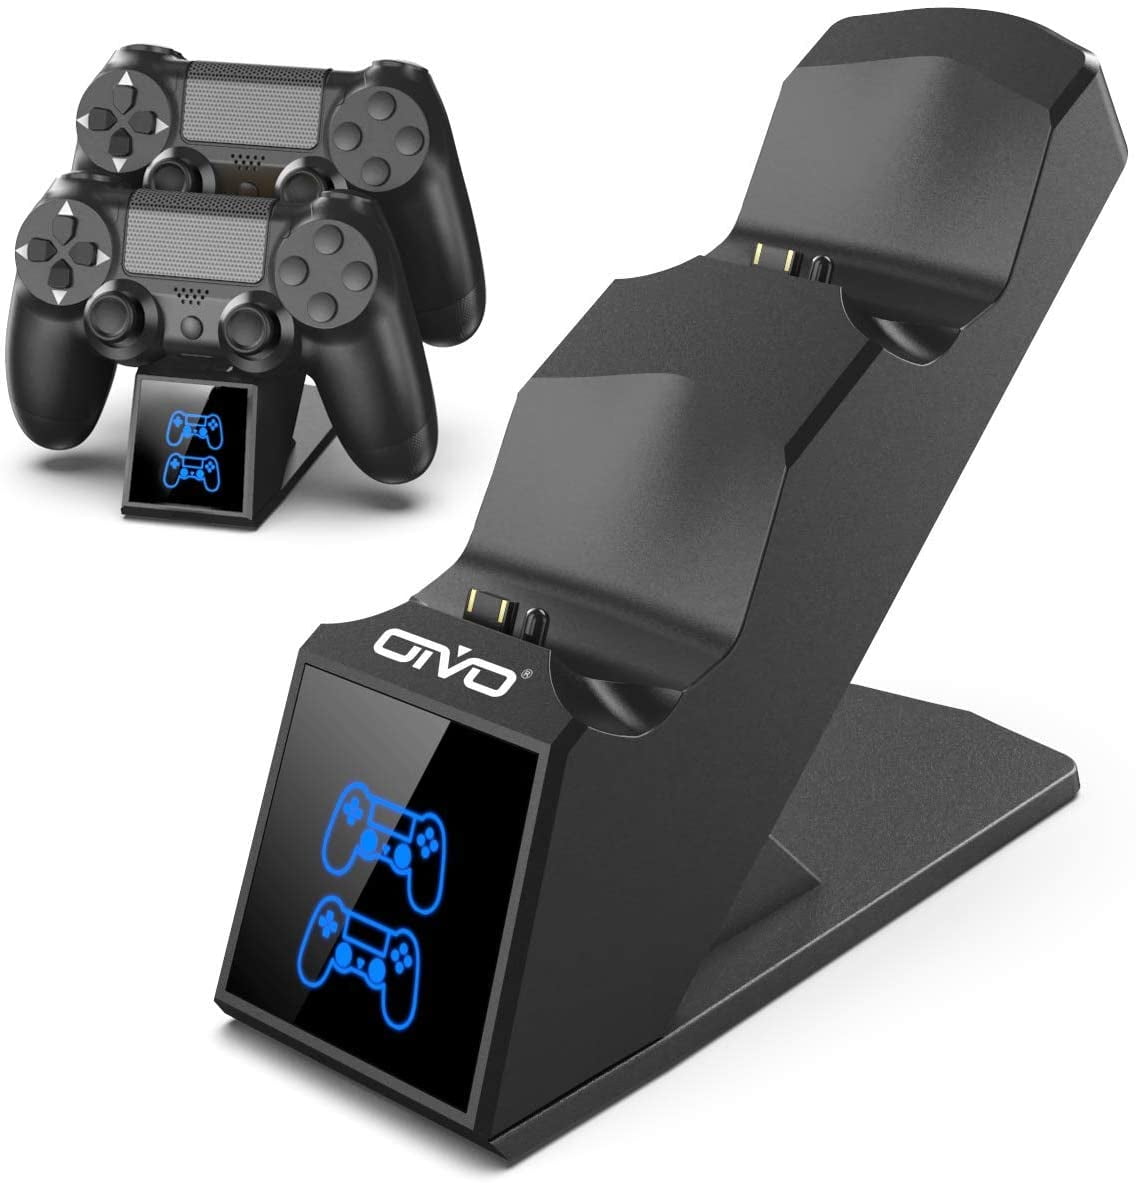 PS4 Controller Charger, OIVO DualShock 4 Controller Charging Station Dock for Playstation 4/PS4/PS4 Slim/PS4 Dual Wireless PS4 Charging Dock - Black - Walmart.com